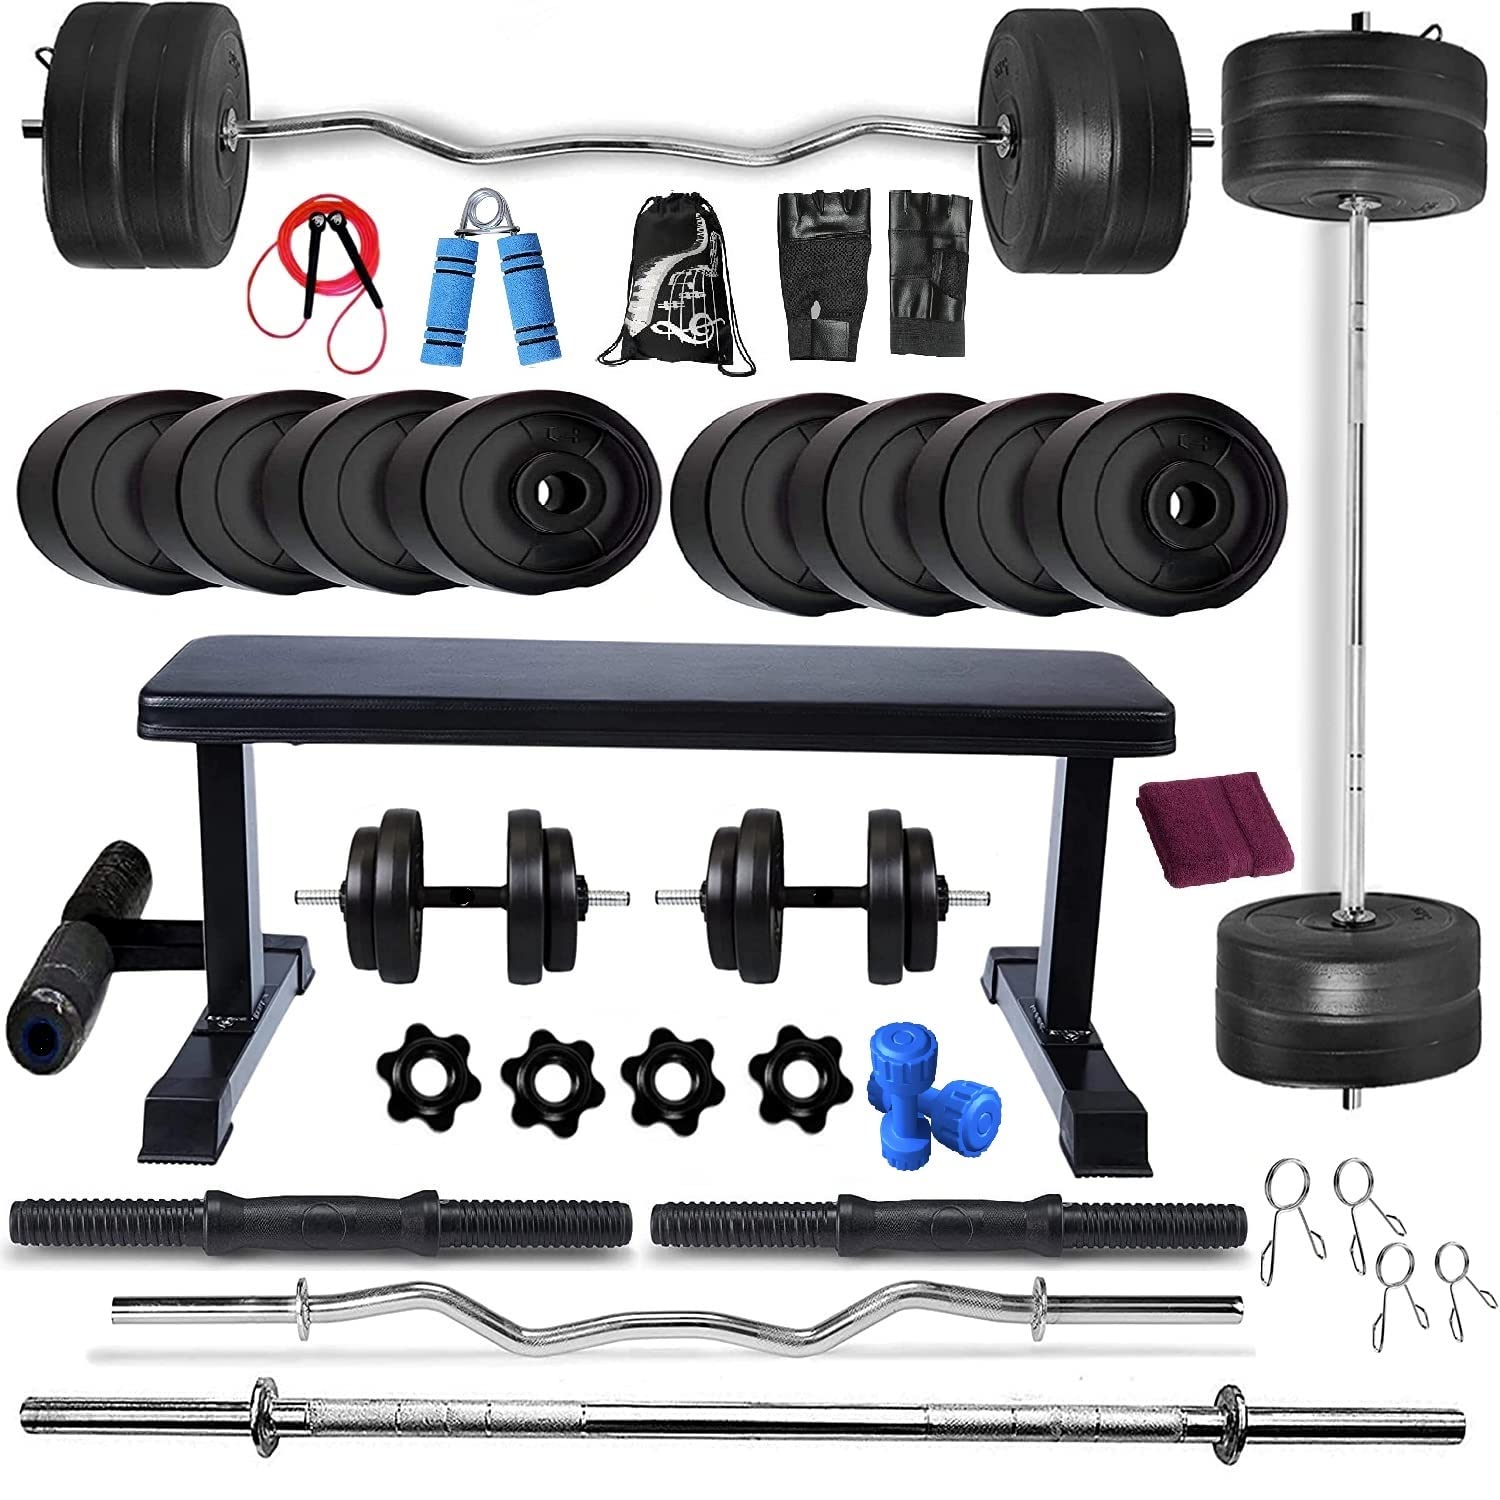 Bodyfit Home Gym Set Combo Kit, Gym Equipment, (20-100 Kg), 3Ft Curl, 5Ft  Plain Rod, Flat Leg Extension Bench,2X14 Dumbbell Rods Weight Plates,  Fitness Exercise Set – Sports Wing